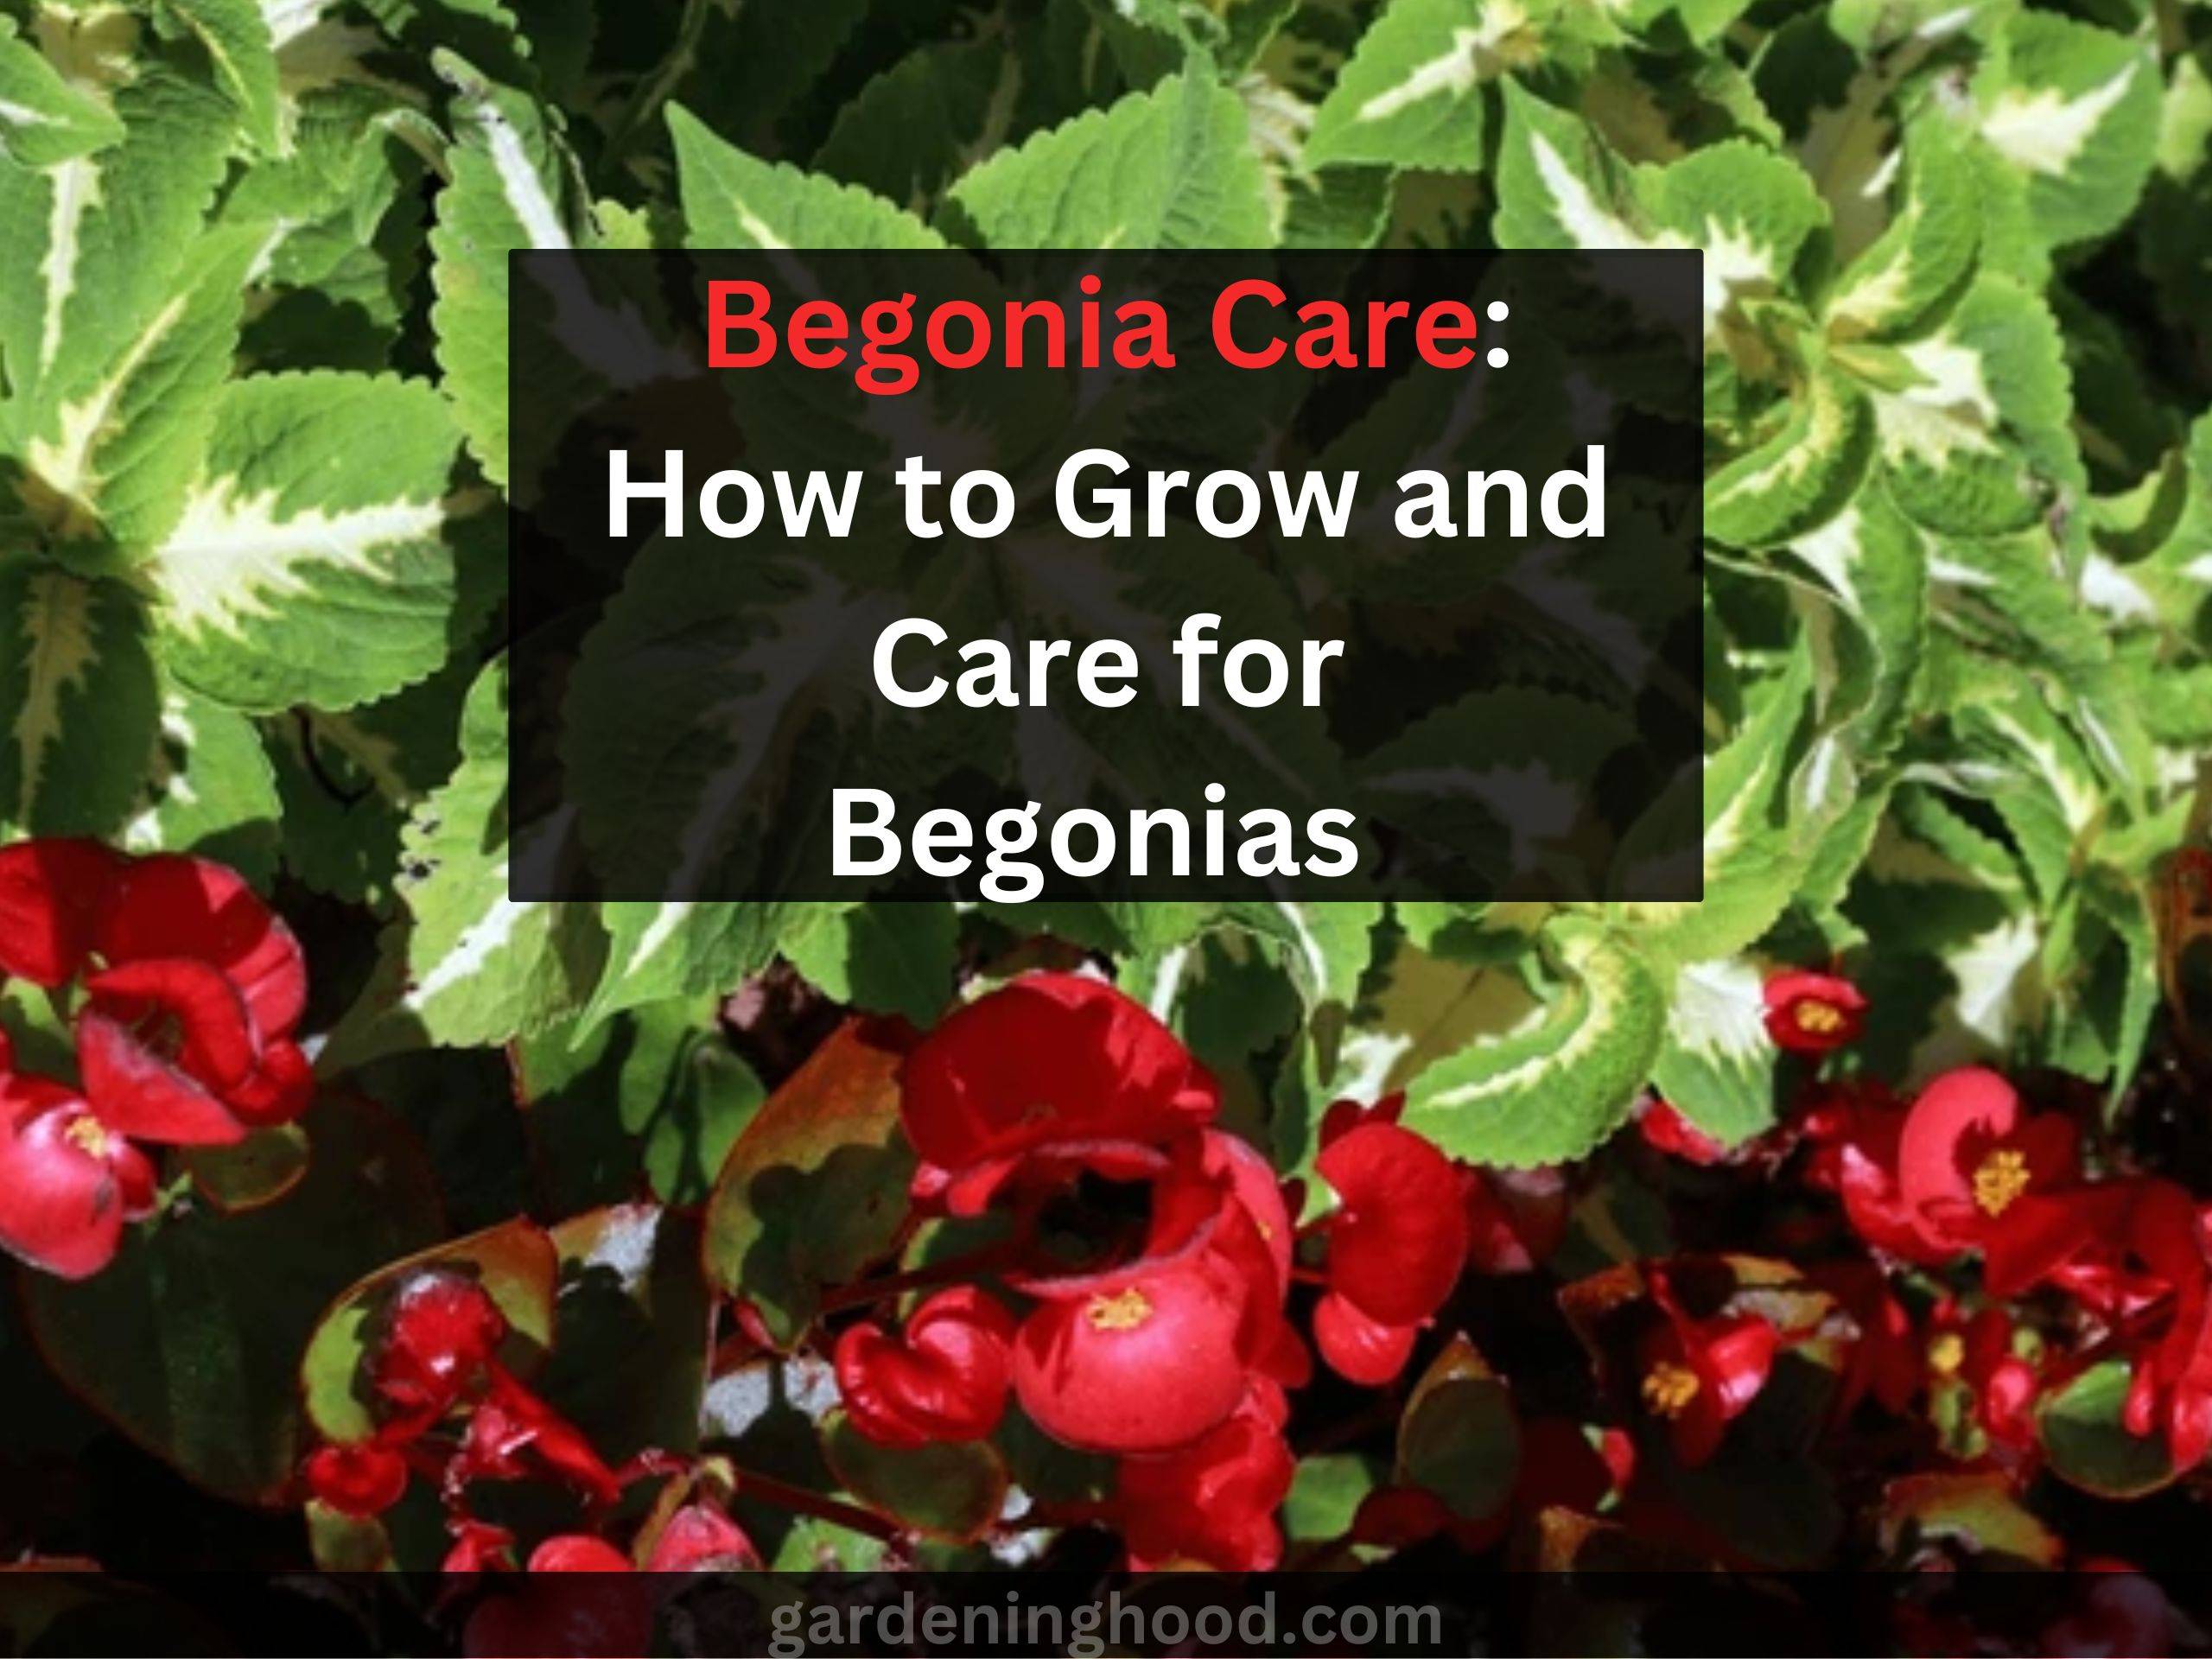 Begonia Care: How to Grow and Care for Begonias